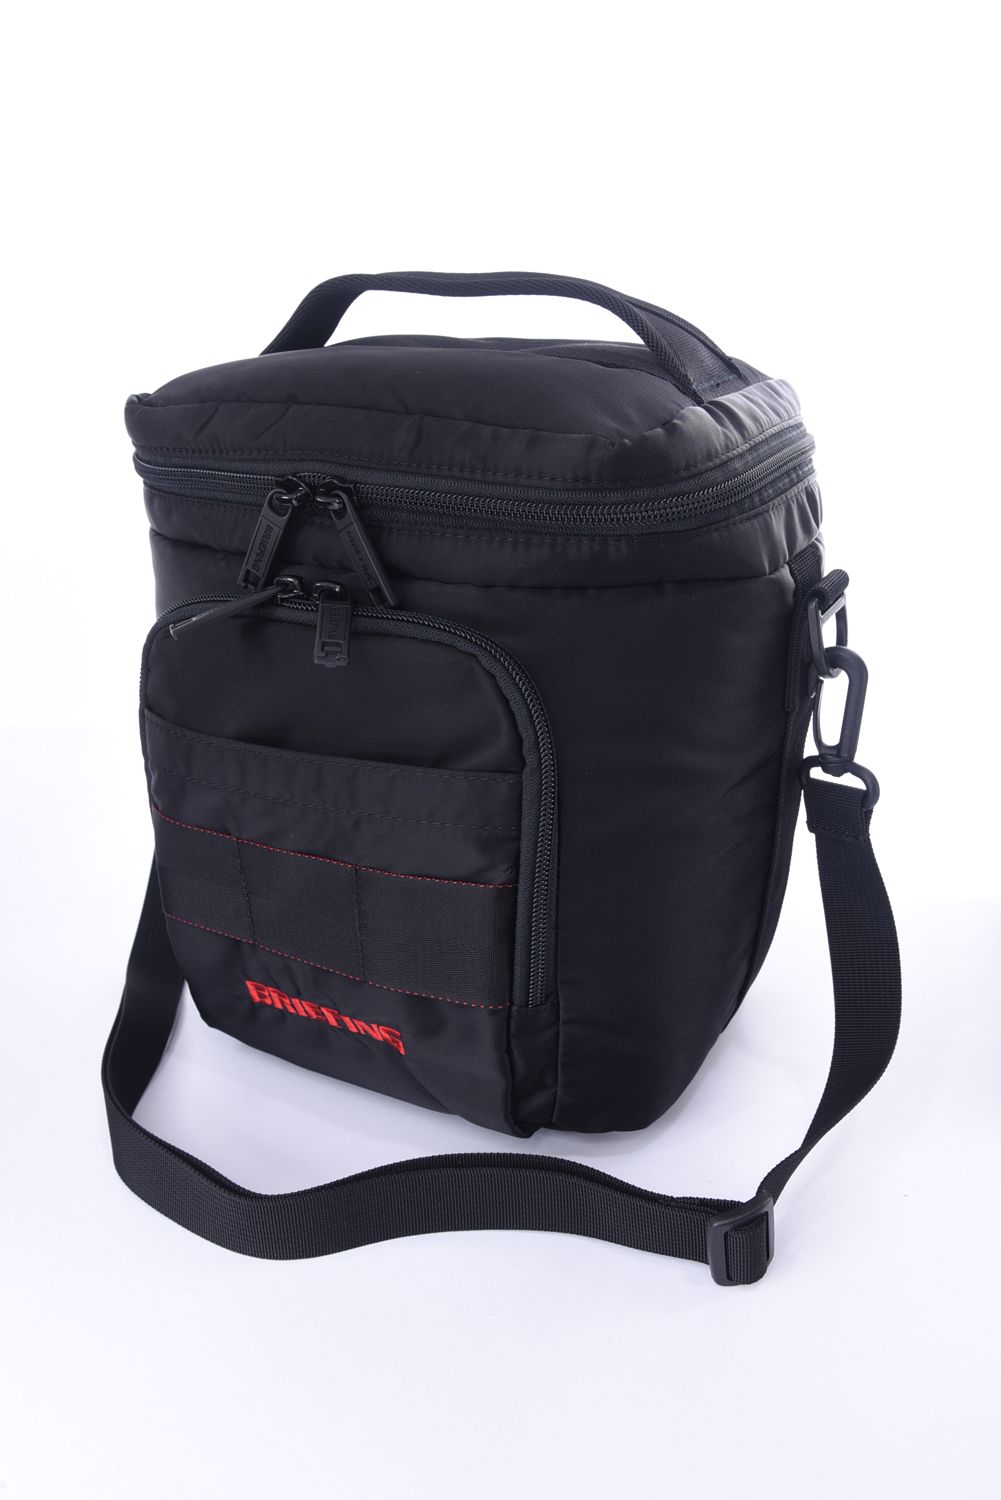 BRIEFING - 【エコツイル】 COOLER BAG M ECO TWILL / クーラーバッグ 